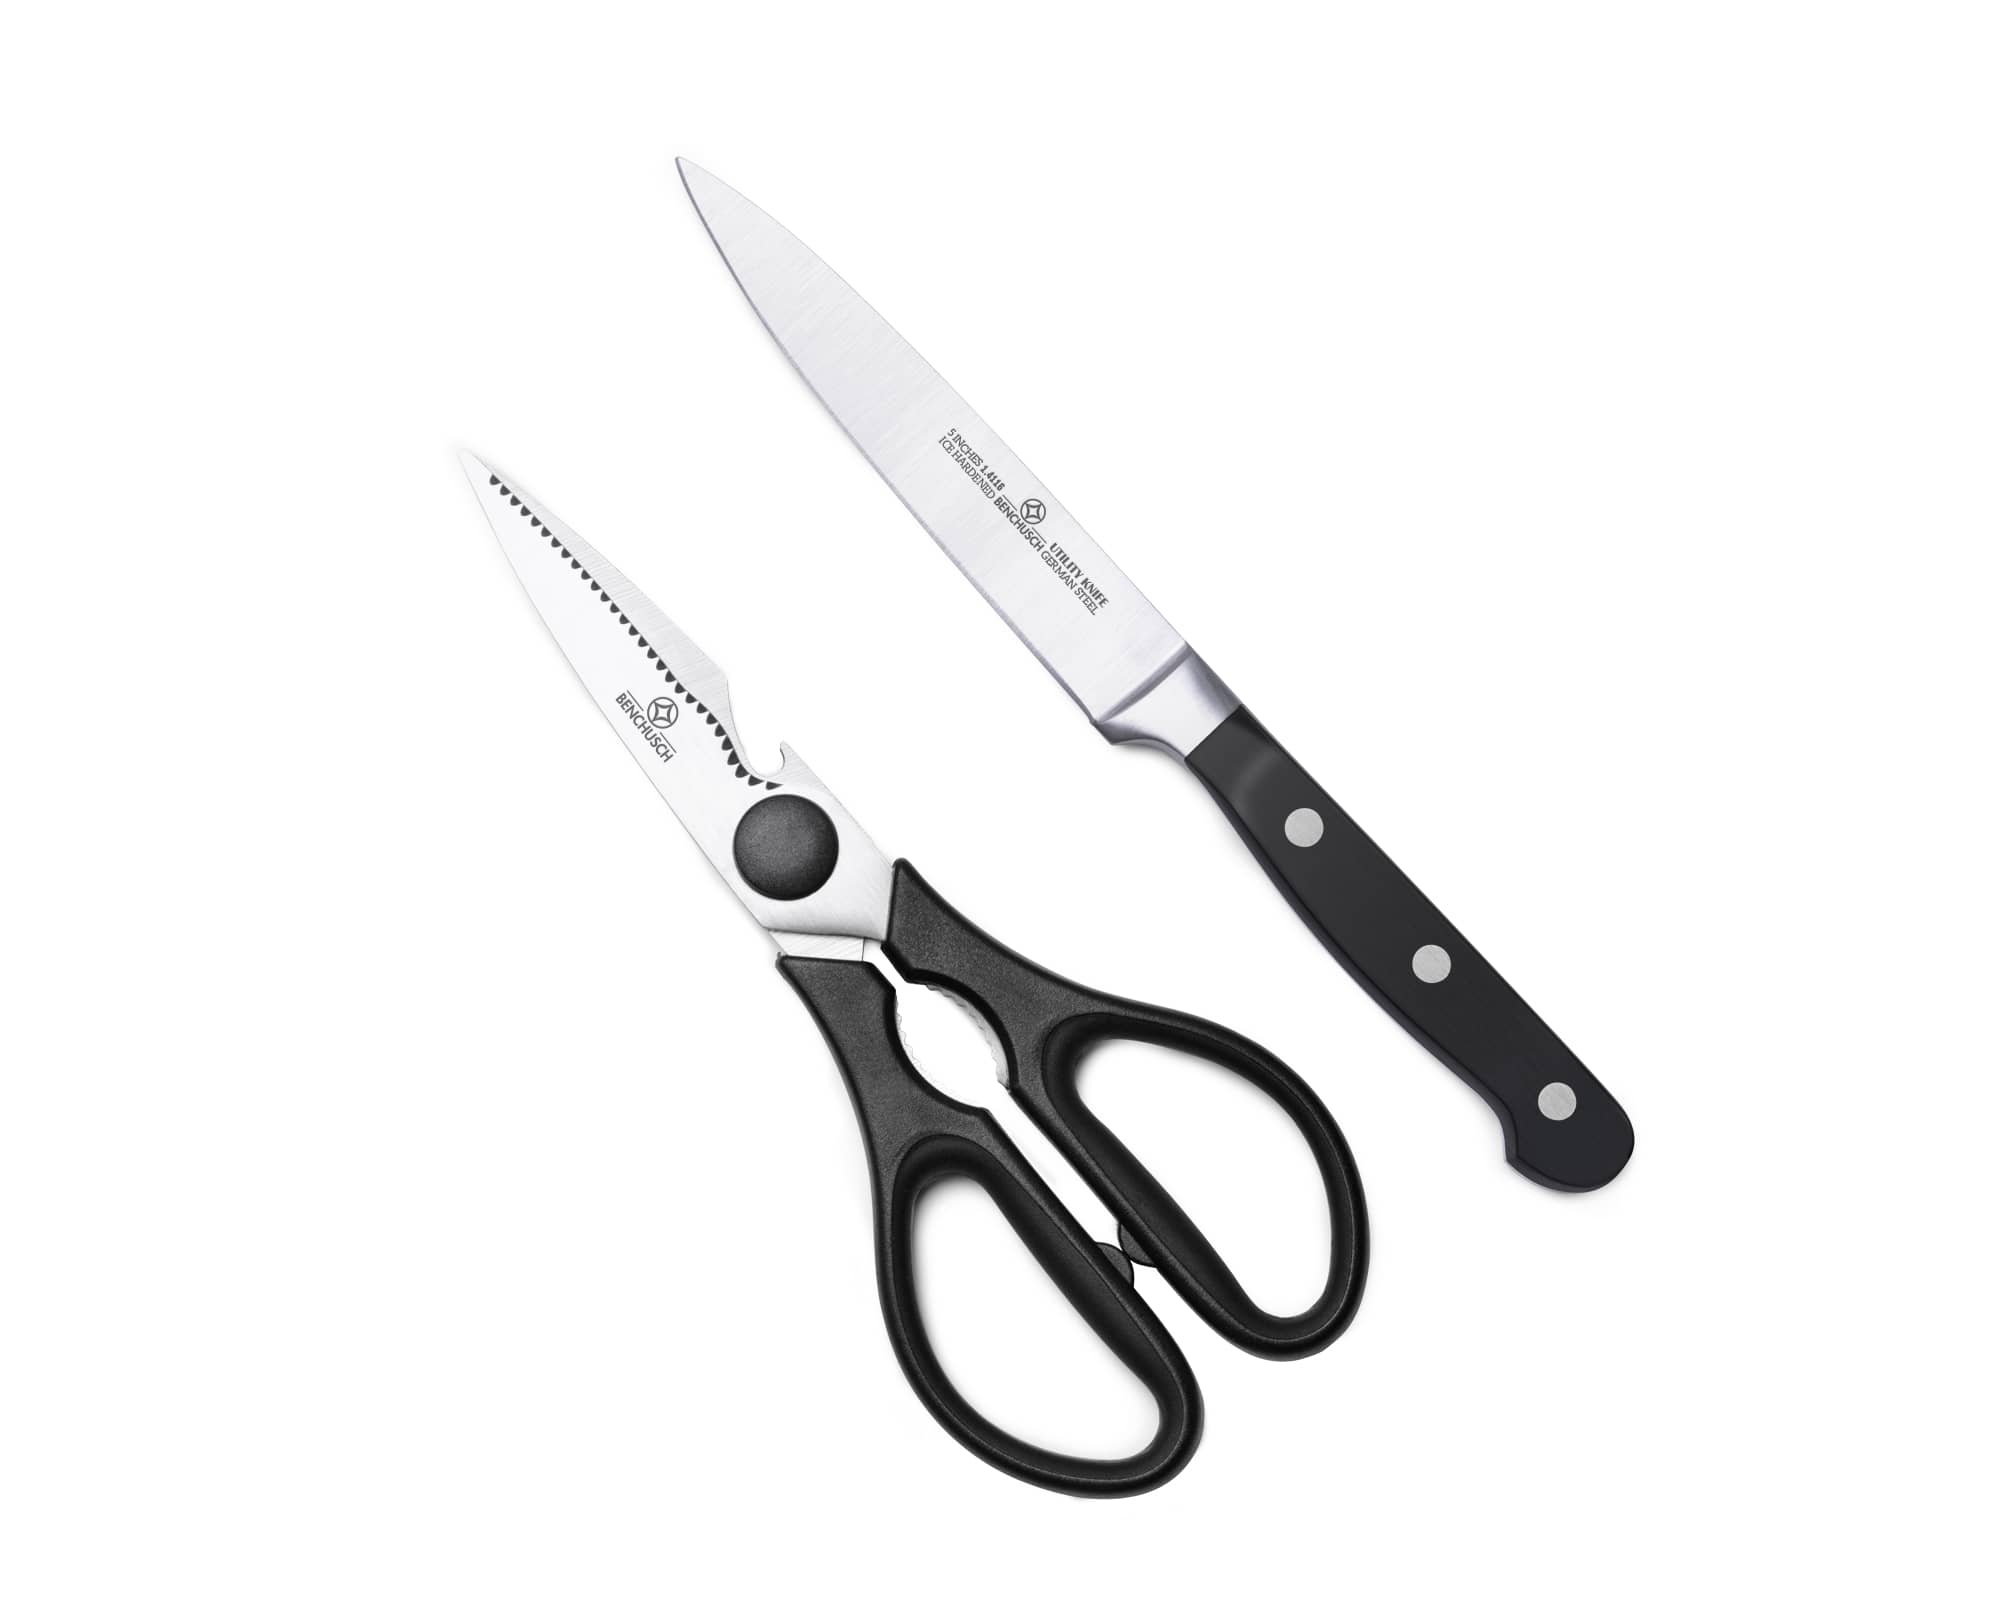 Classic 5-inch Utility Knife and 8-Inch Scissors, Black with ABS Handle and German Steel Blade